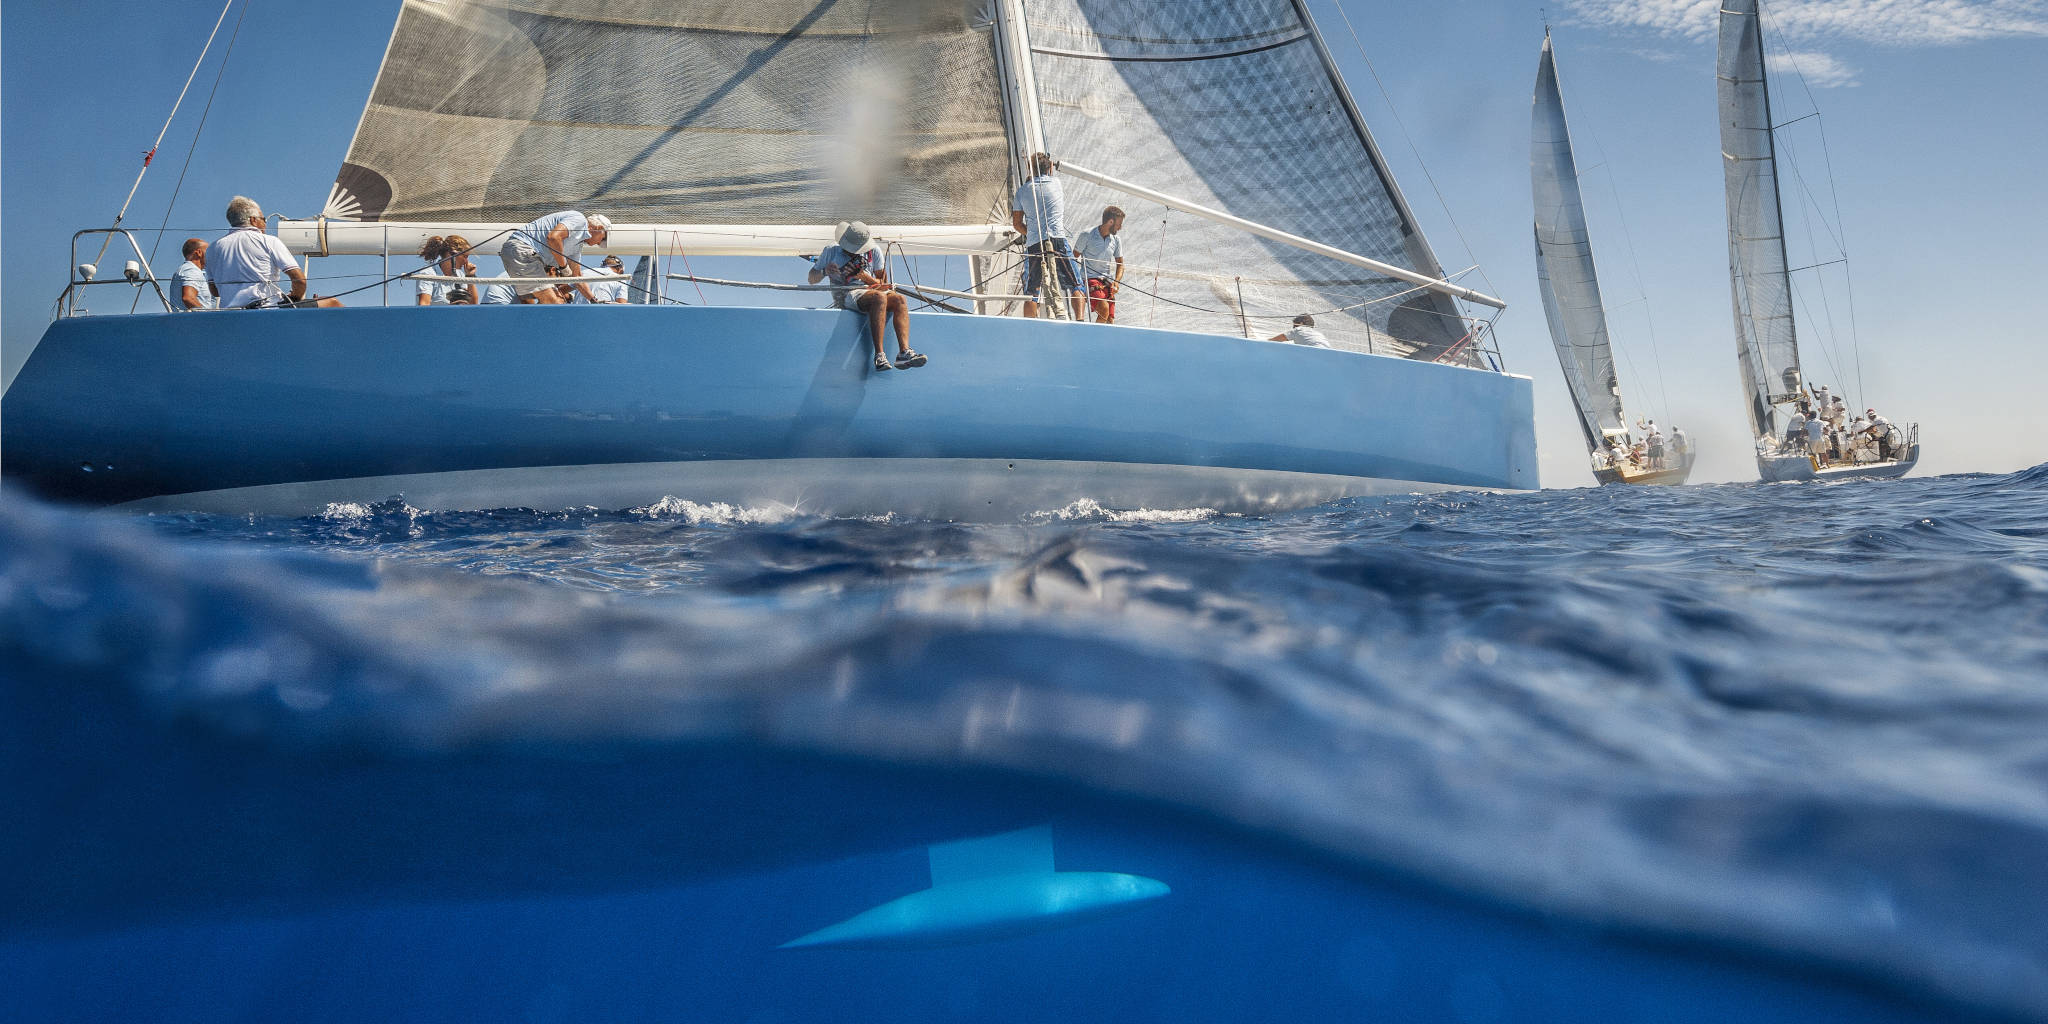 Blue sailing boat on the sea with keel under water